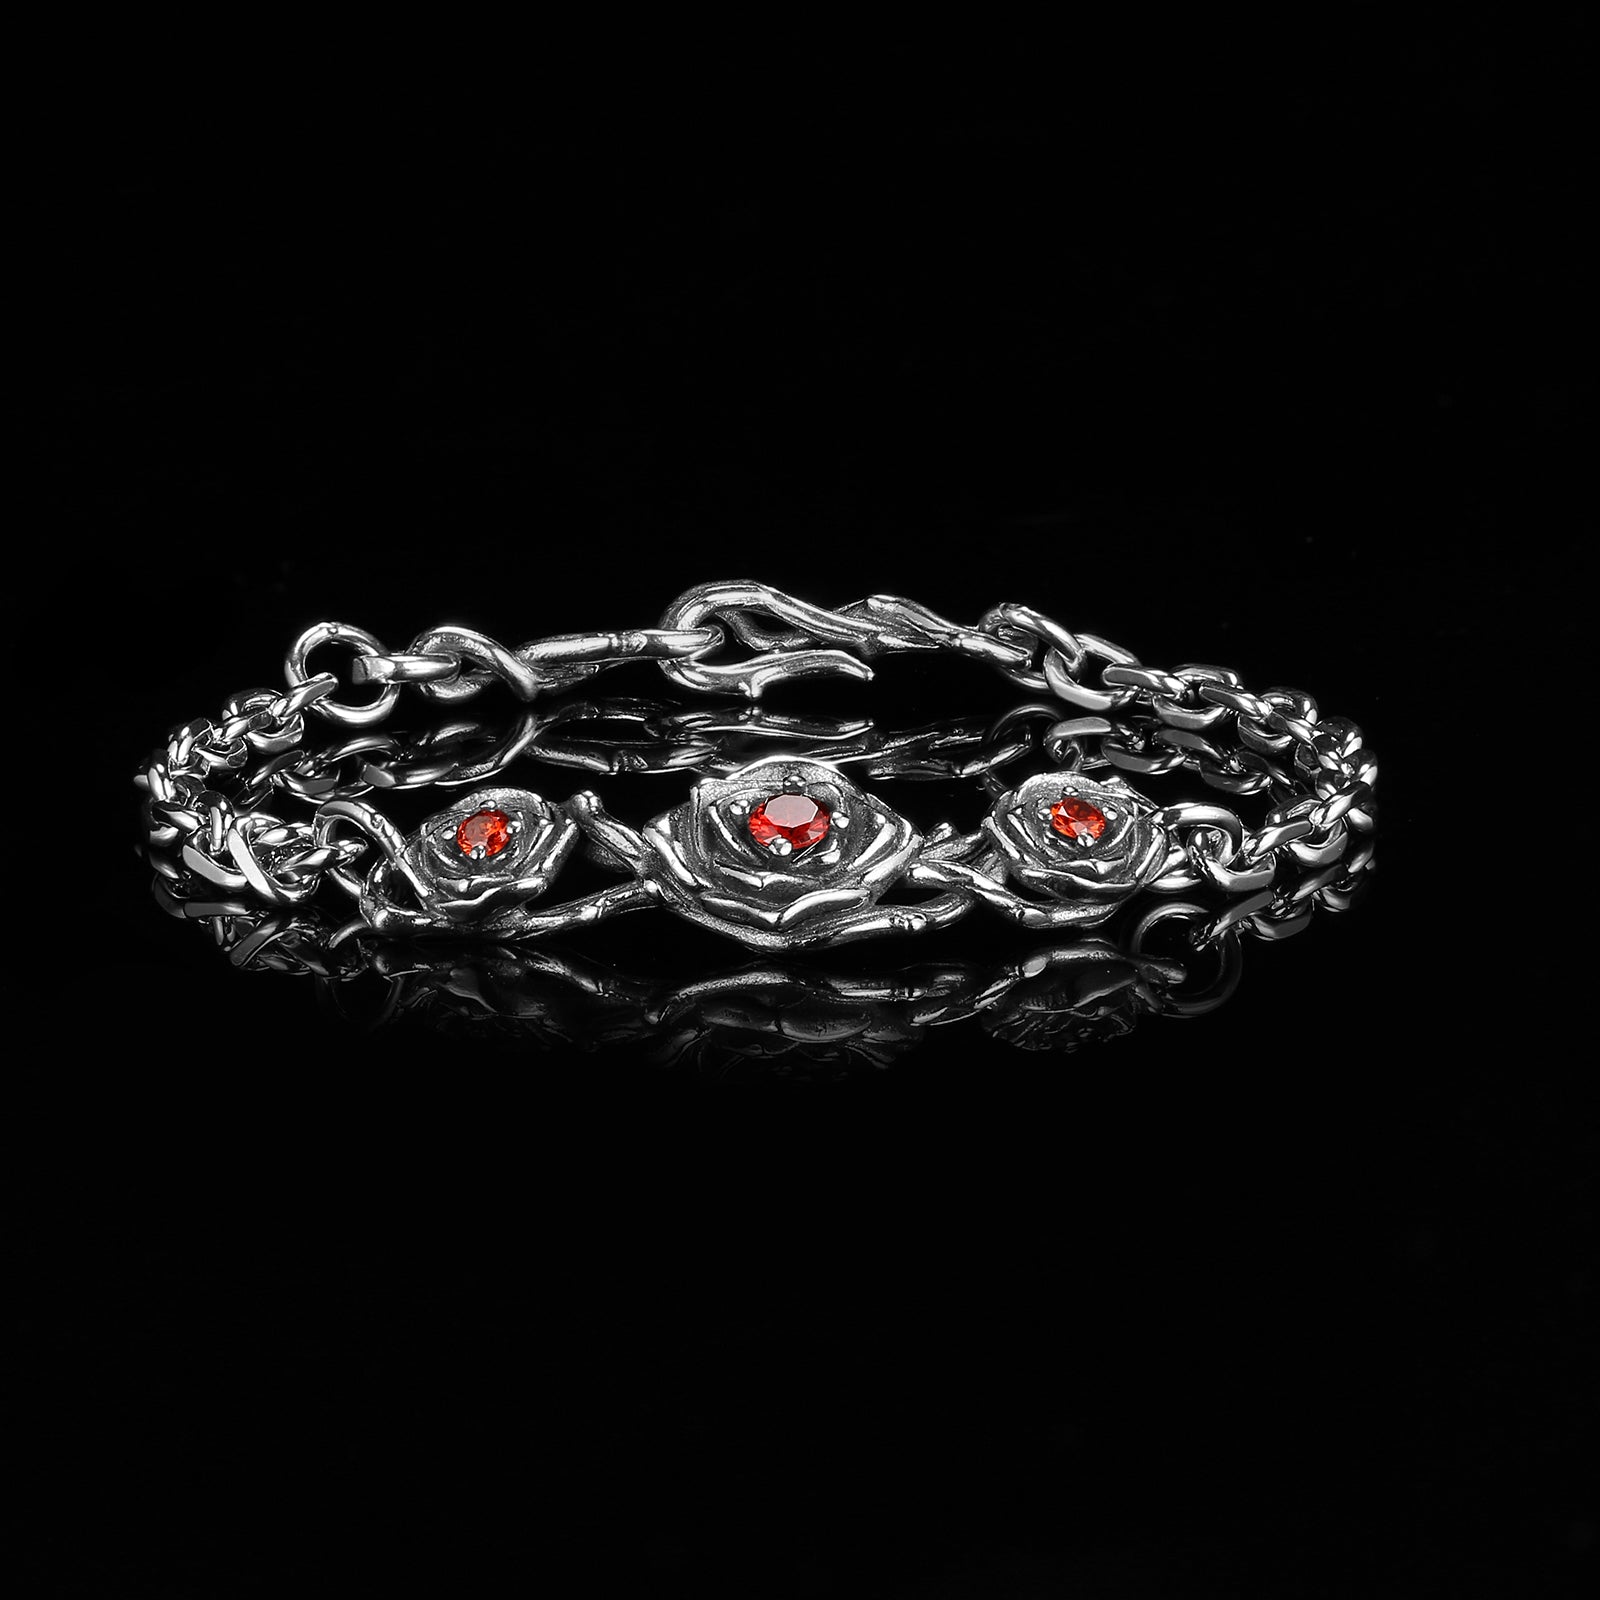 RED ROSES ARMBAND. - 925 ZILVER